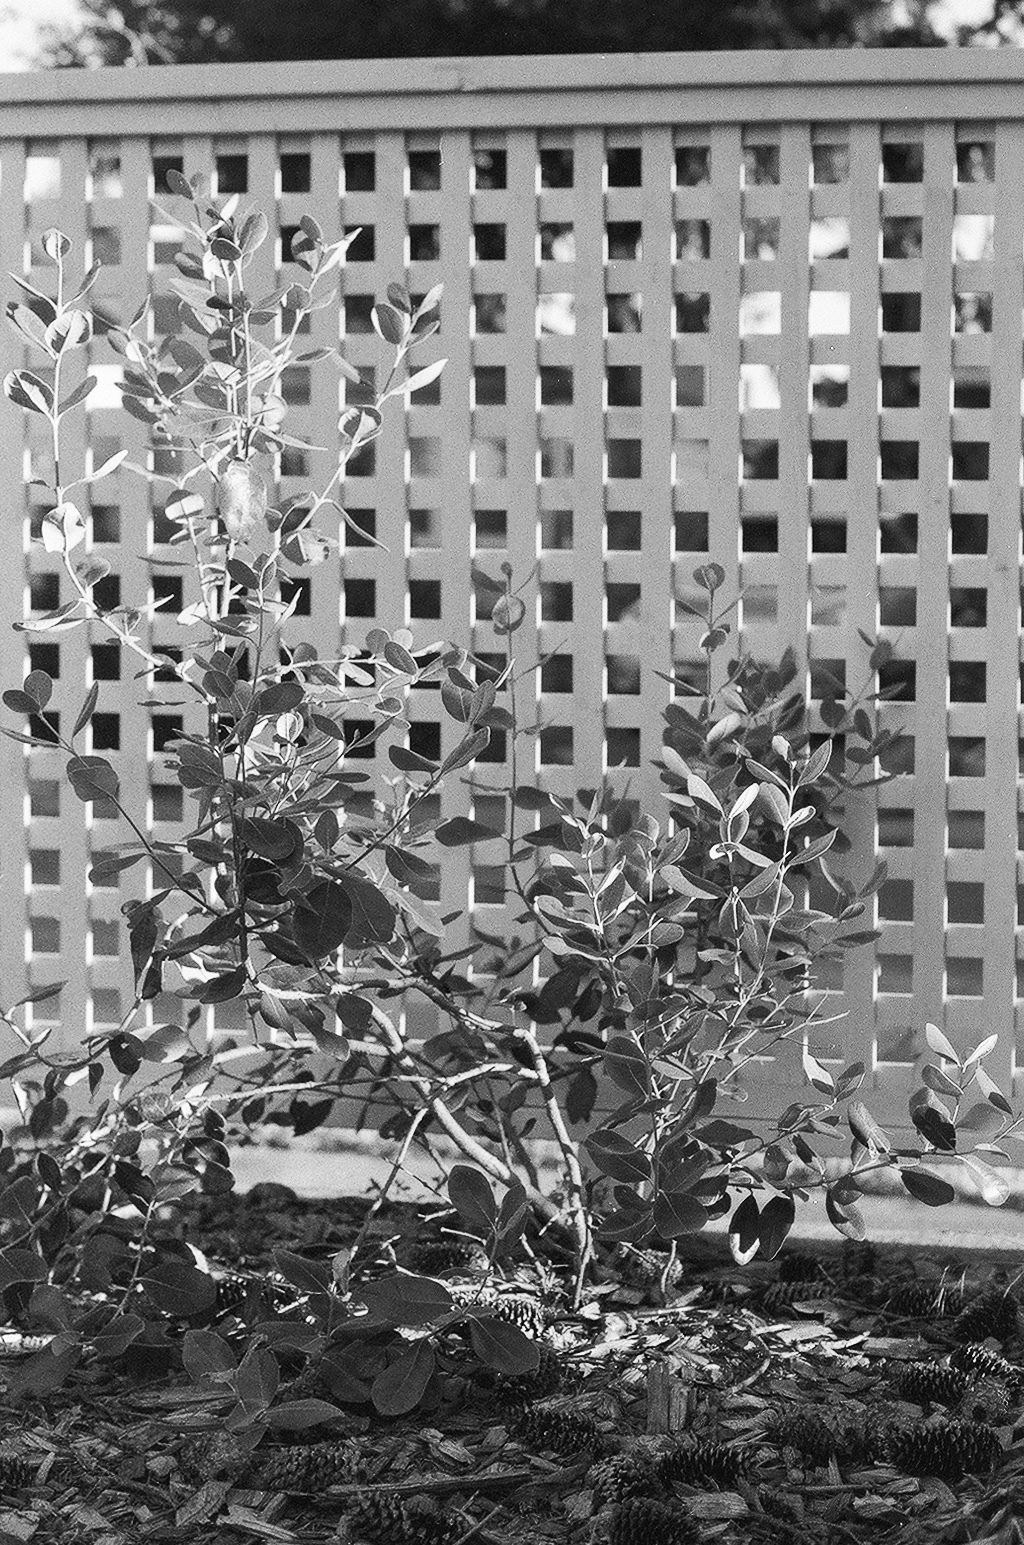 Black and white photo of a small plant in front of a white lattice fence. The ground is covered with wood mulch and pine cones.